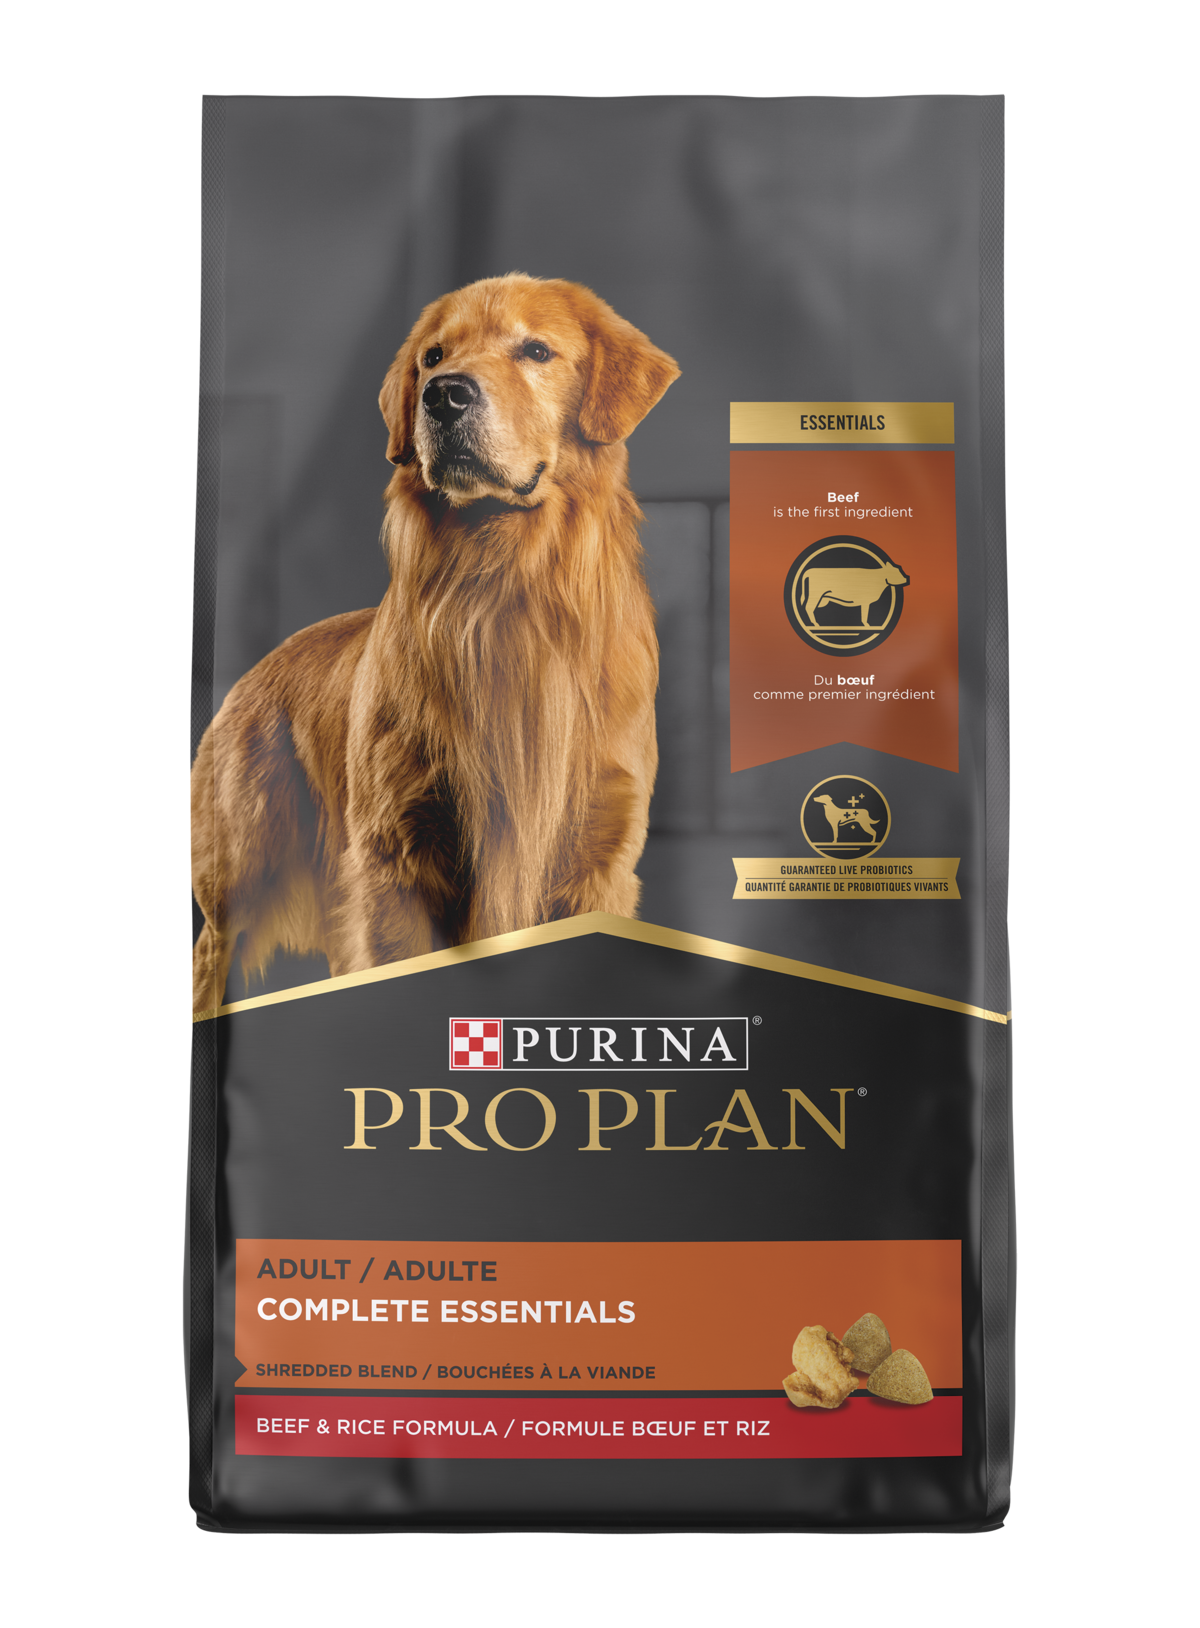 Purina Pro Plan Adult Complete Essentials Shredded Blend Beef & Rice, 35 lbs